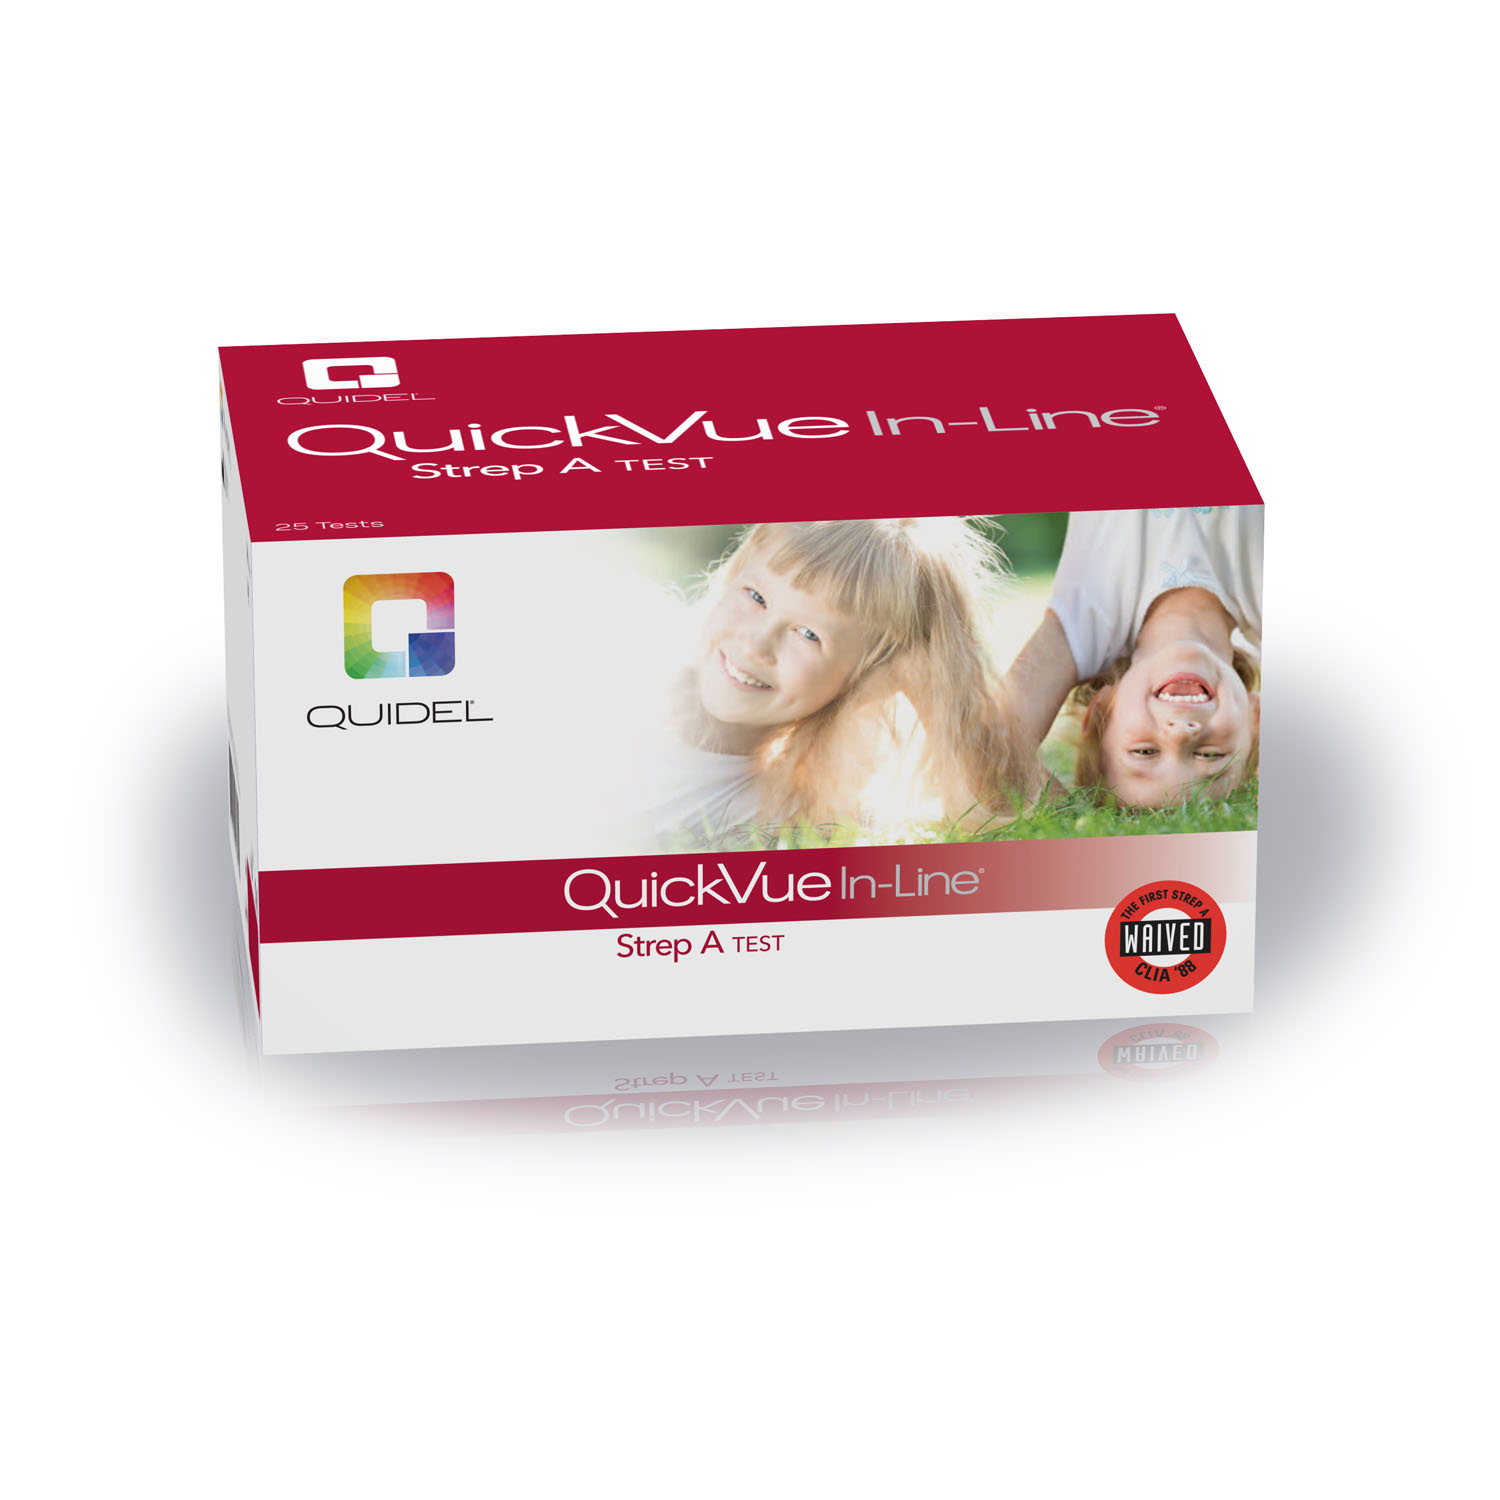 QUIDEL QUICKVUE IN-LINE STREP A KIT : 0343 KT                       $102.22 Stocked